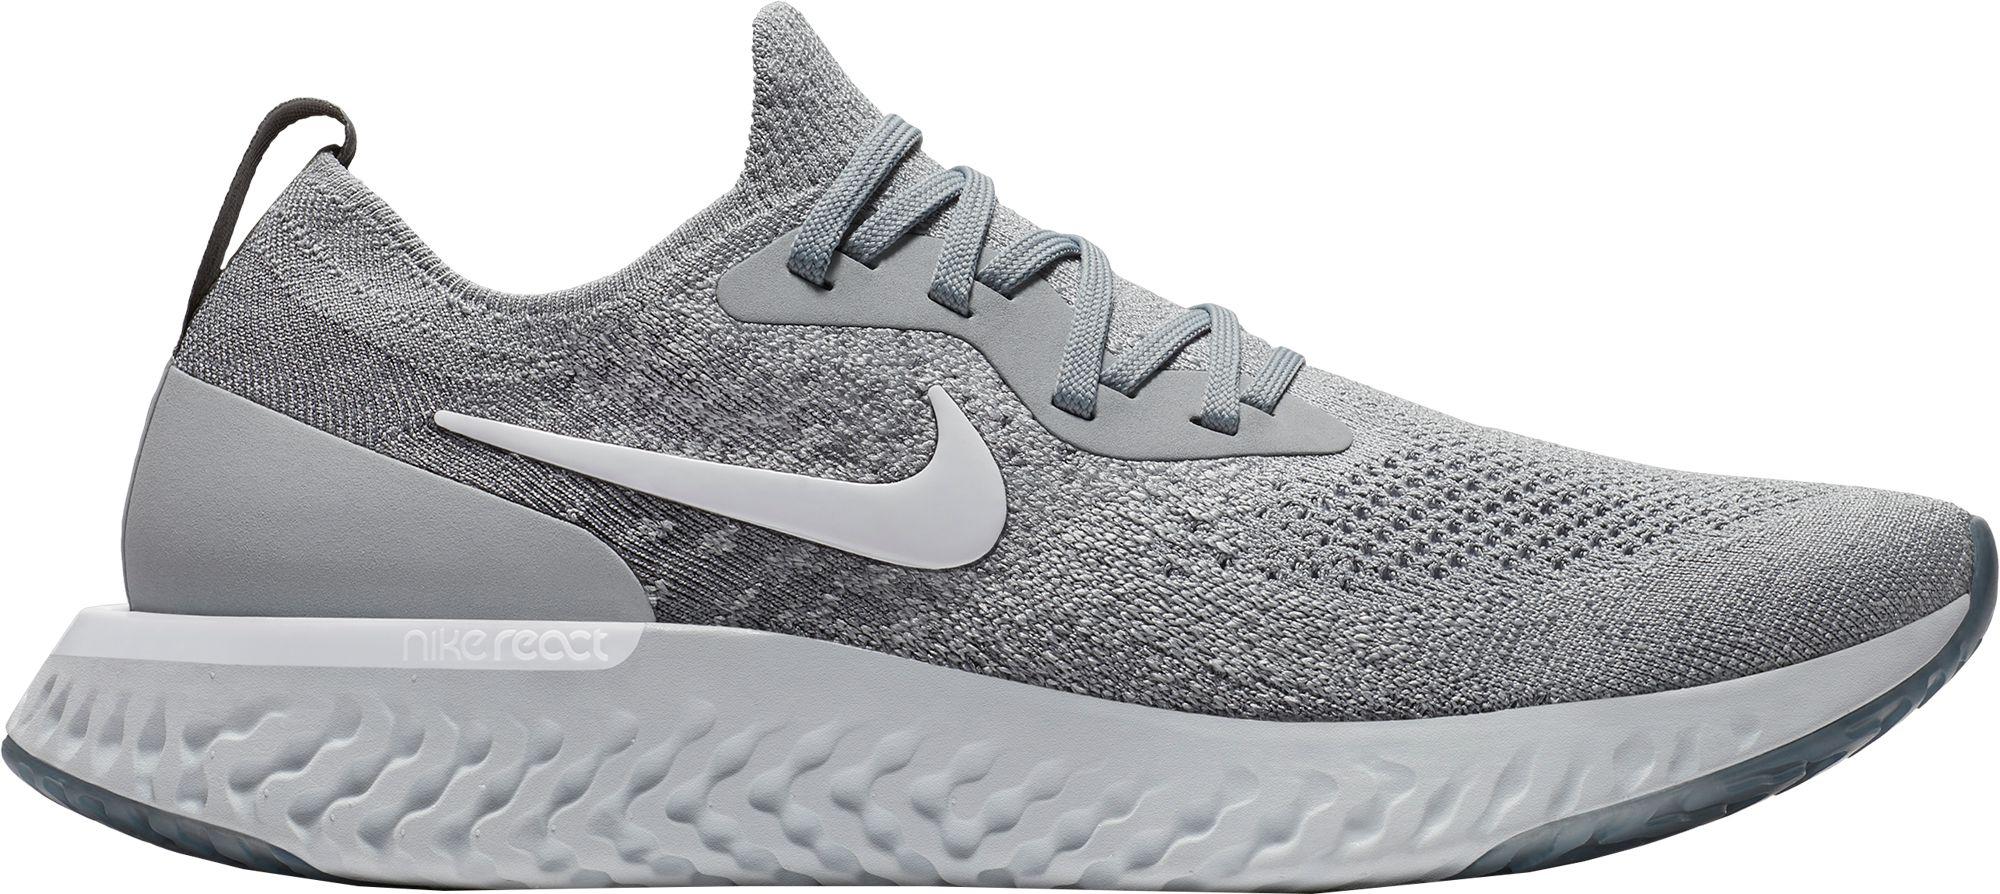 Lyst - Nike Epic React Flyknit Running Shoes in Gray for Men